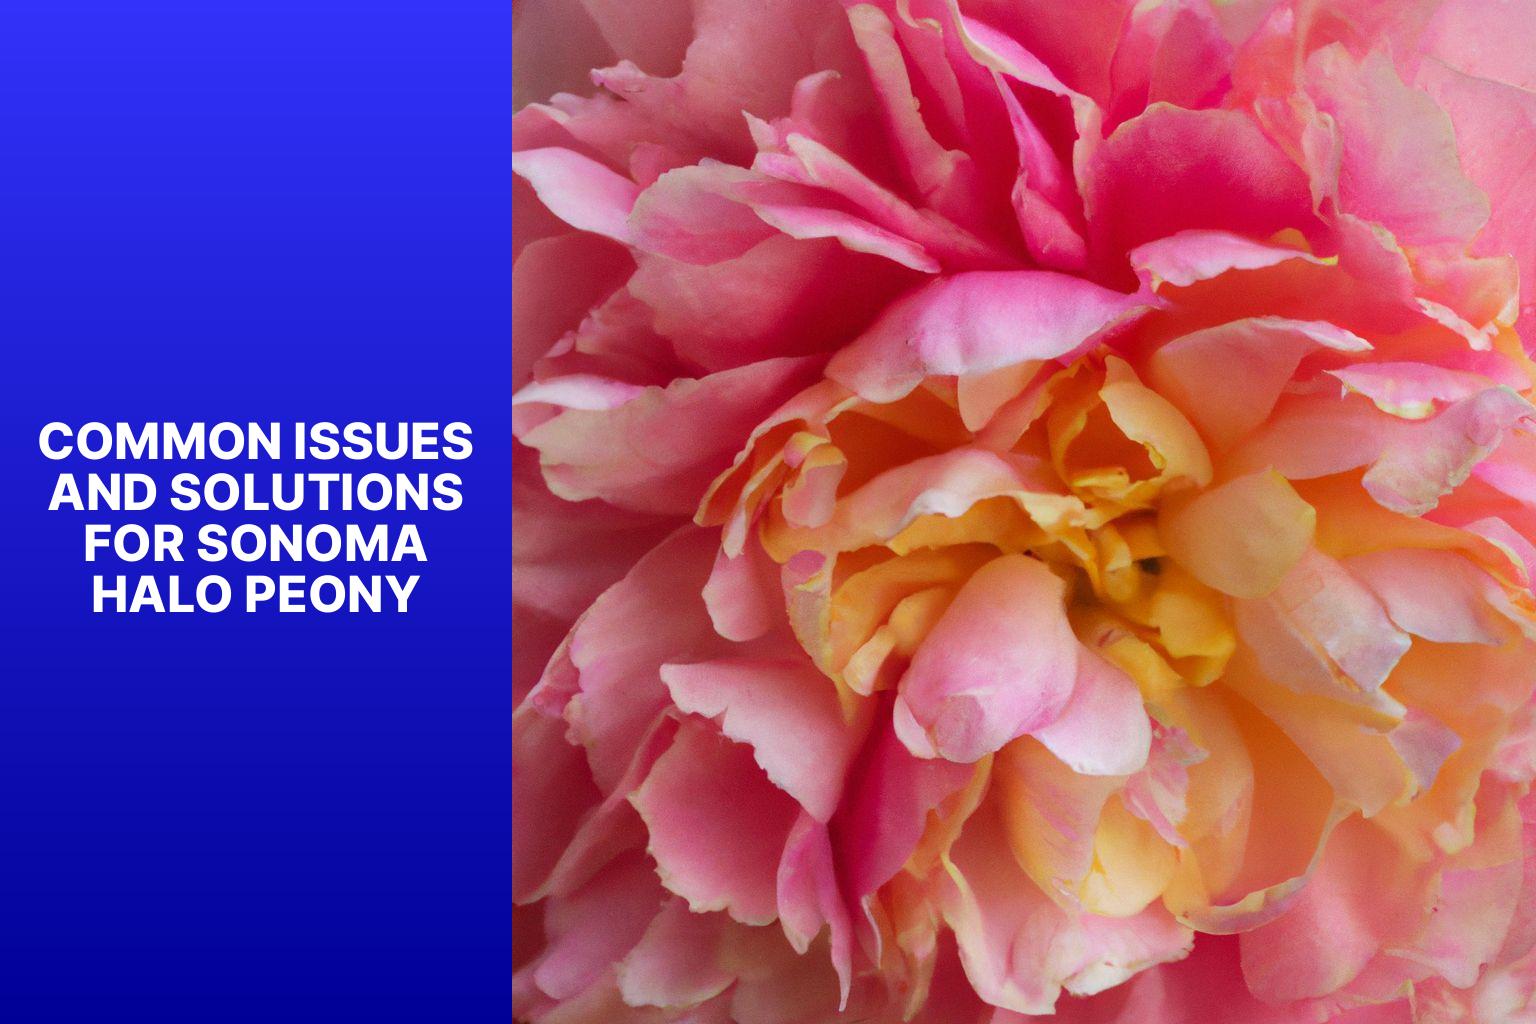 Common Issues and Solutions for Sonoma Halo Peony - sonoma halo peony 